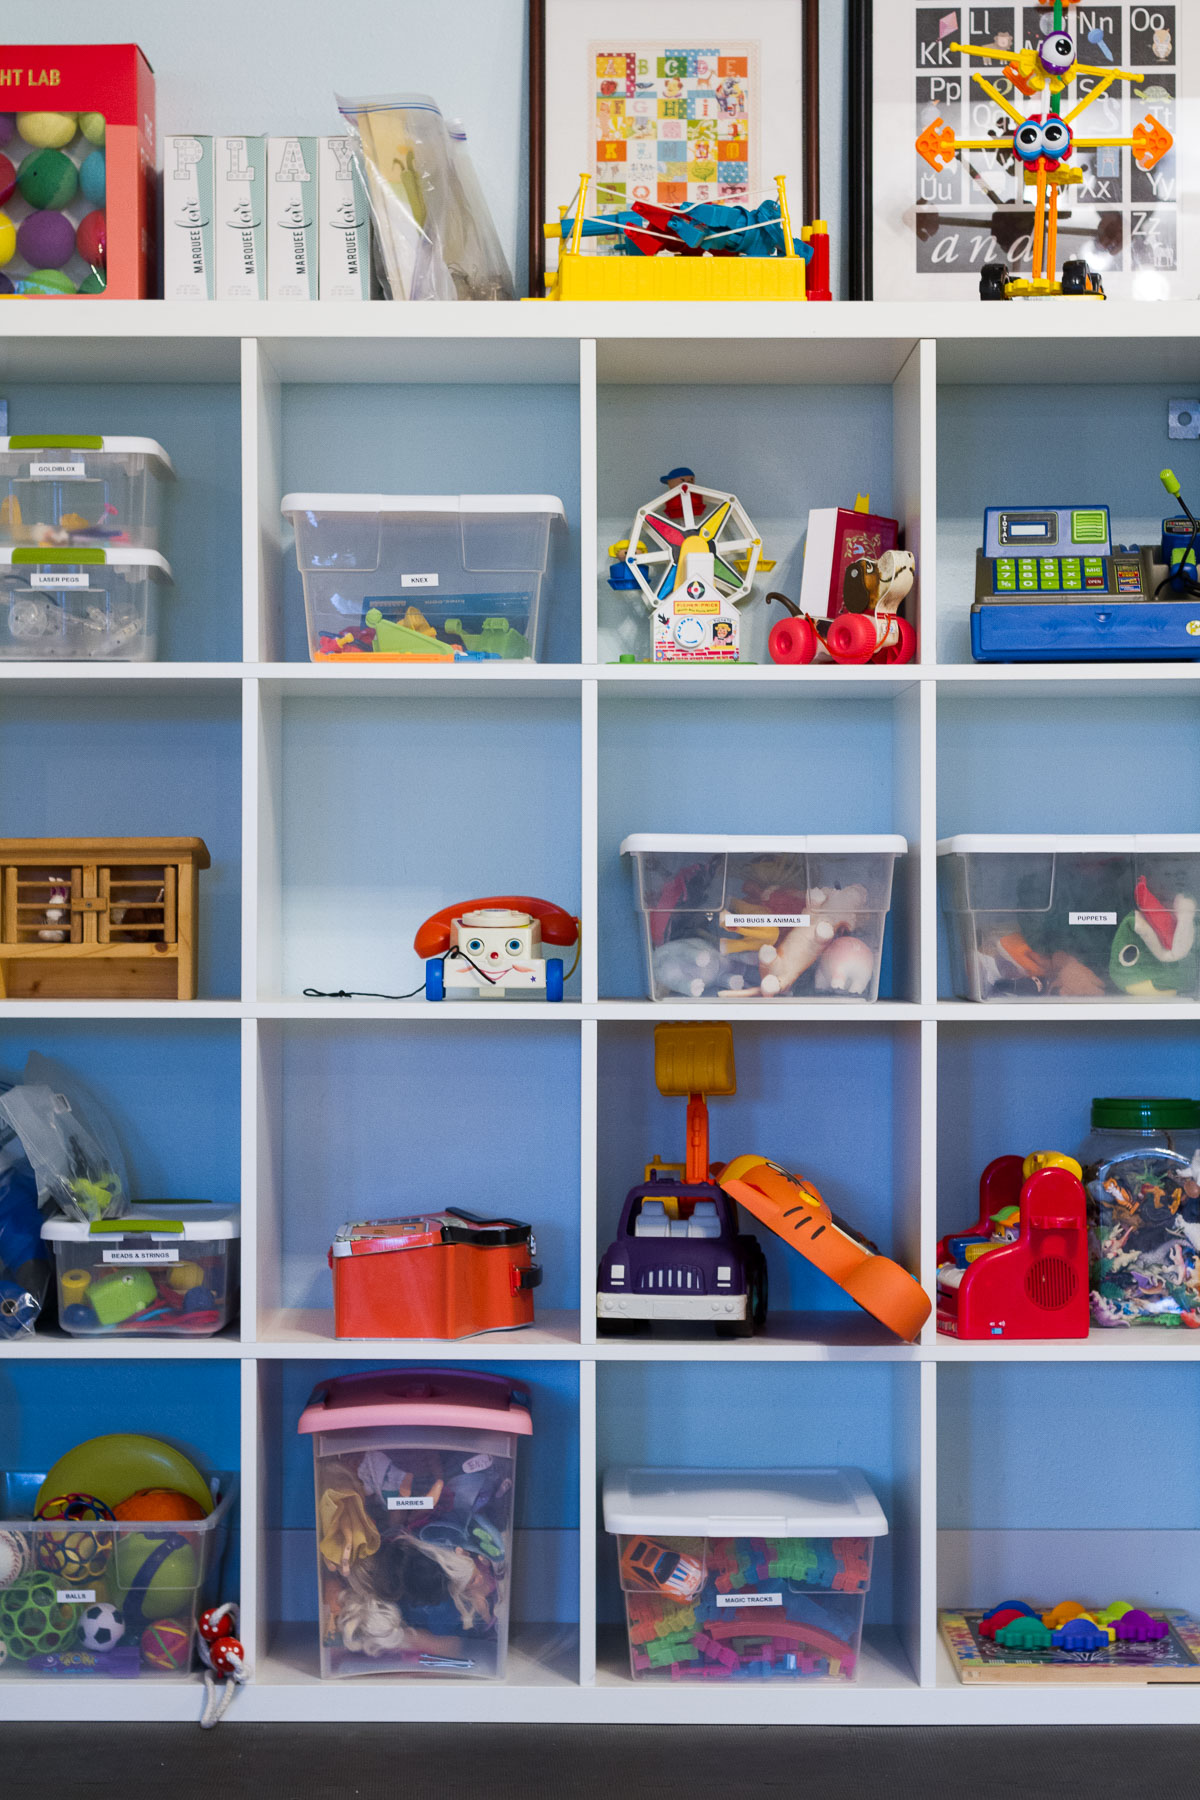 We cleaned and reorganized our playroom over the holidays, thanks to the Dymo Letratag label maker. Two weeks in and the room is still spotless!